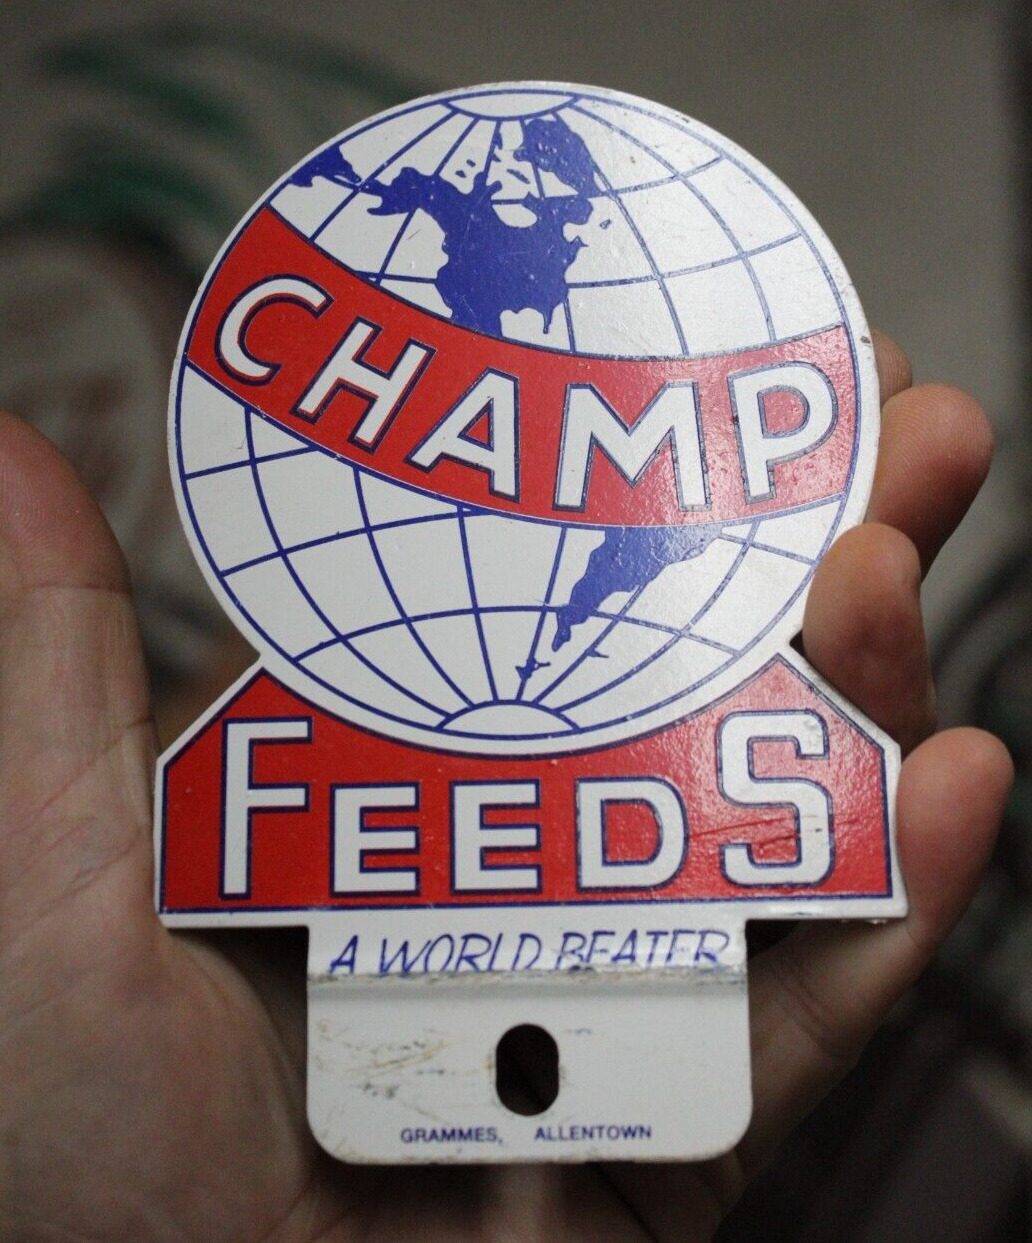 1950s CHAMP FEEDS STAMPED PAINTED METAL TOPPER SIGN FARM SEED FEED CORN WORLD